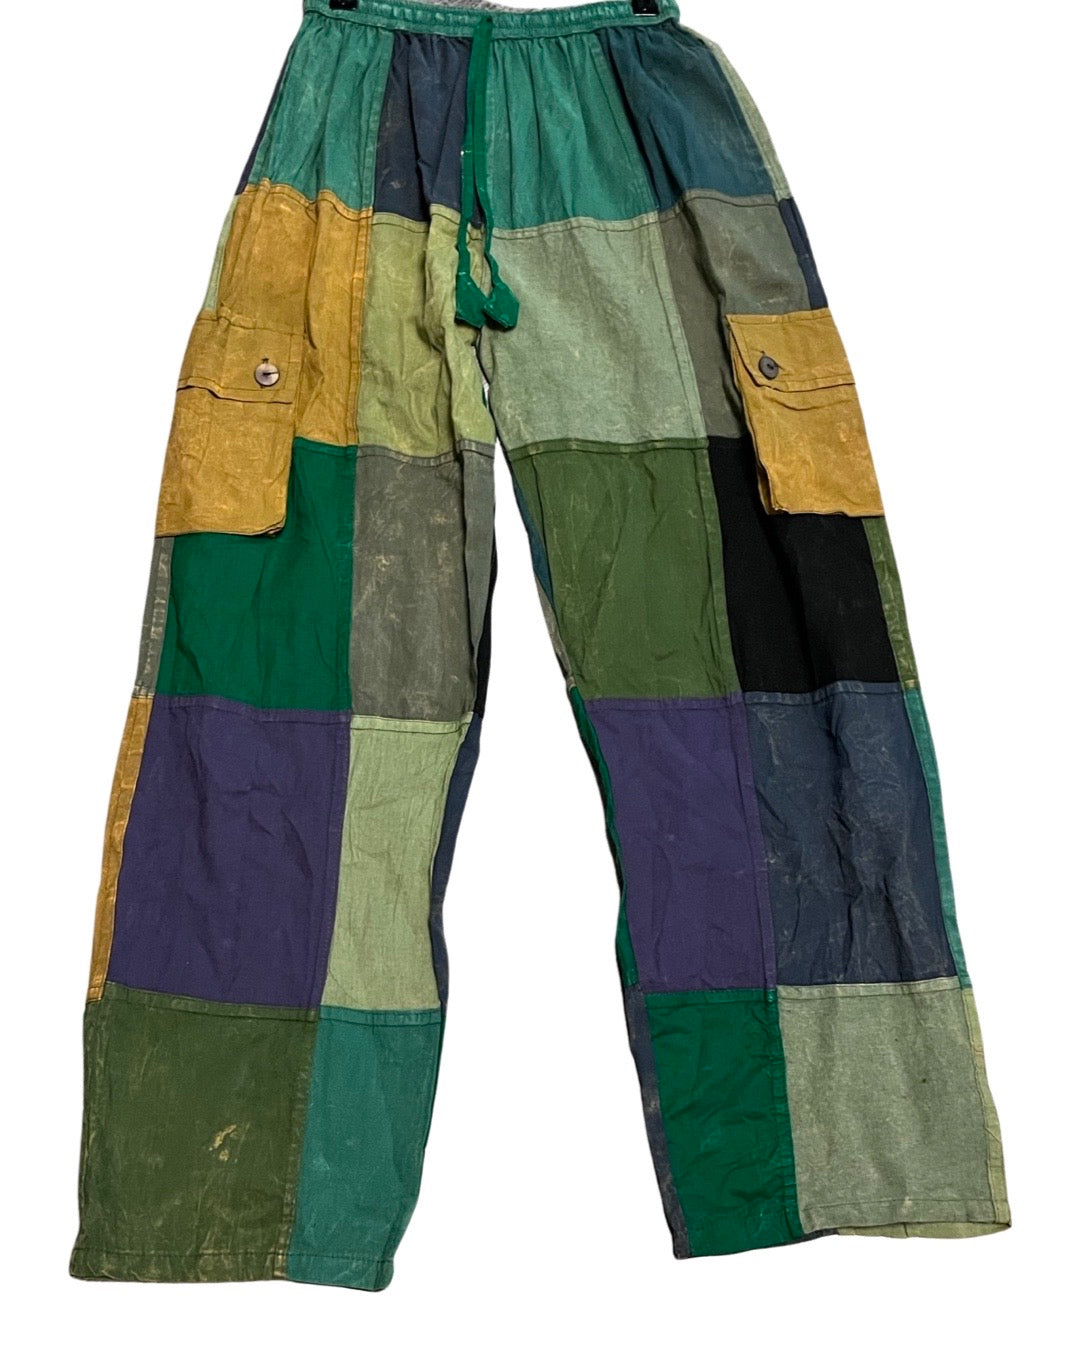 Stonewashed Cotton Patchwork Pants (Small Only)